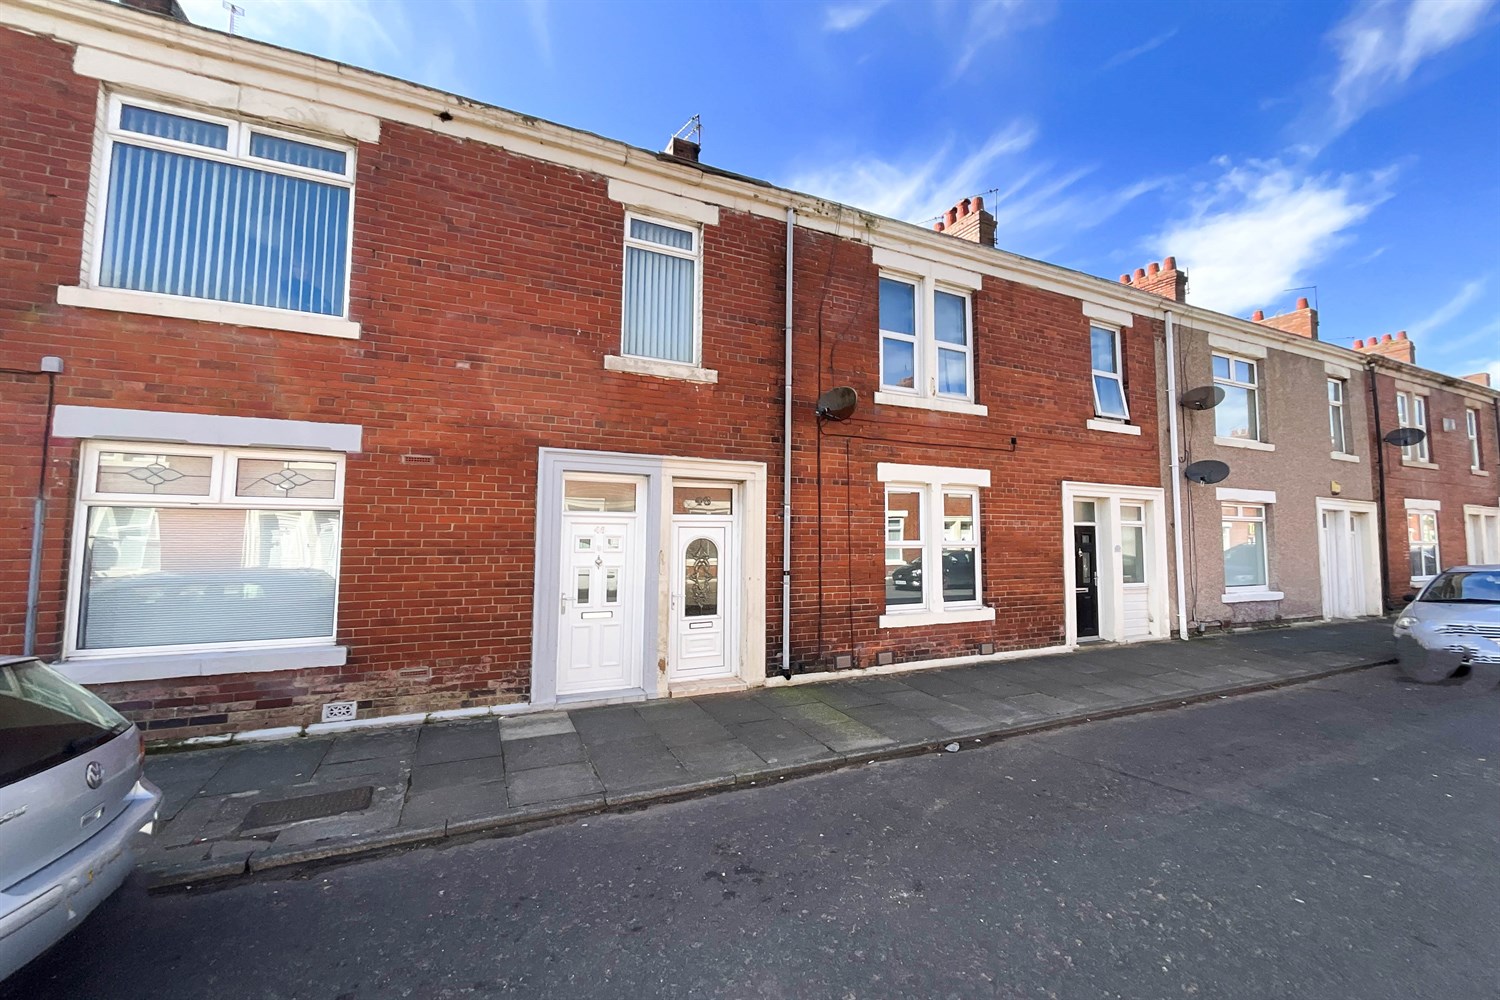 2 bed flat for sale in Northbourne Road, Jarrow - Property Image 1